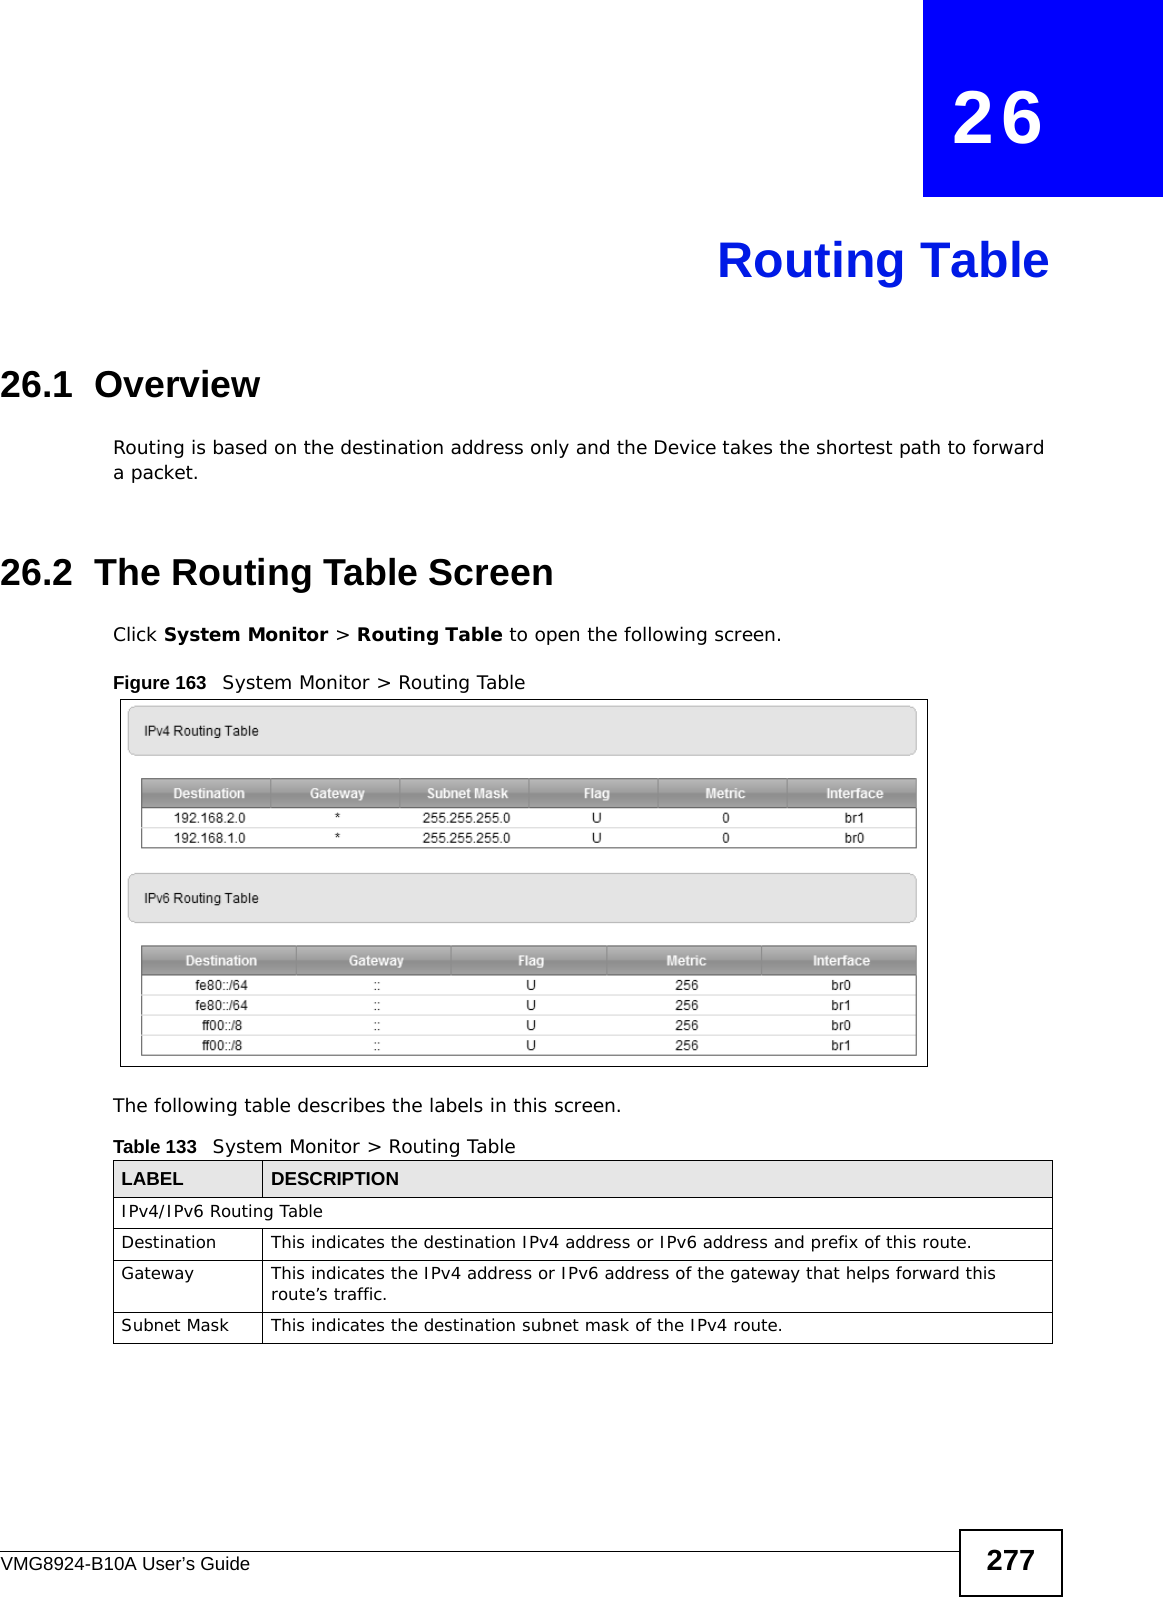 VMG8924-B10A User’s Guide 277CHAPTER   26Routing Table26.1  OverviewRouting is based on the destination address only and the Device takes the shortest path to forward a packet.26.2  The Routing Table ScreenClick System Monitor &gt; Routing Table to open the following screen.Figure 163   System Monitor &gt; Routing TableThe following table describes the labels in this screen.Table 133   System Monitor &gt; Routing TableLABEL DESCRIPTIONIPv4/IPv6 Routing TableDestination This indicates the destination IPv4 address or IPv6 address and prefix of this route.Gateway This indicates the IPv4 address or IPv6 address of the gateway that helps forward this route’s traffic.Subnet Mask This indicates the destination subnet mask of the IPv4 route.